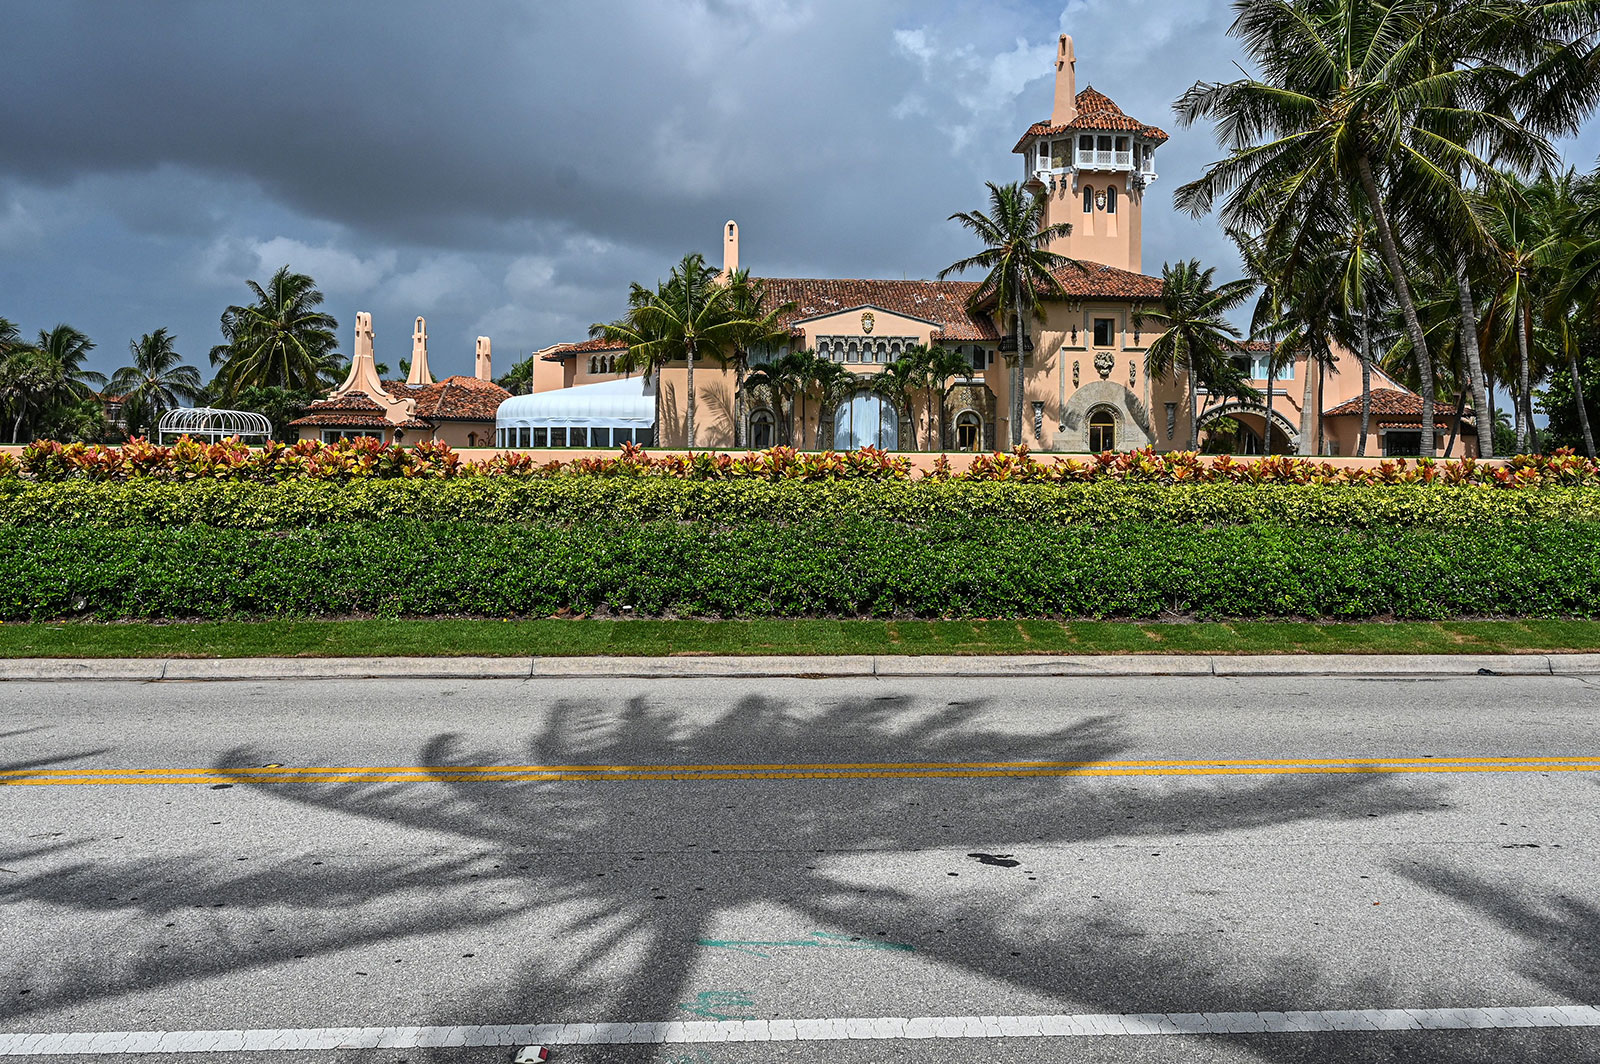 Former President Donald Trump's Mar-a-Lago residence in Palm Beach, Florida, on August 9.